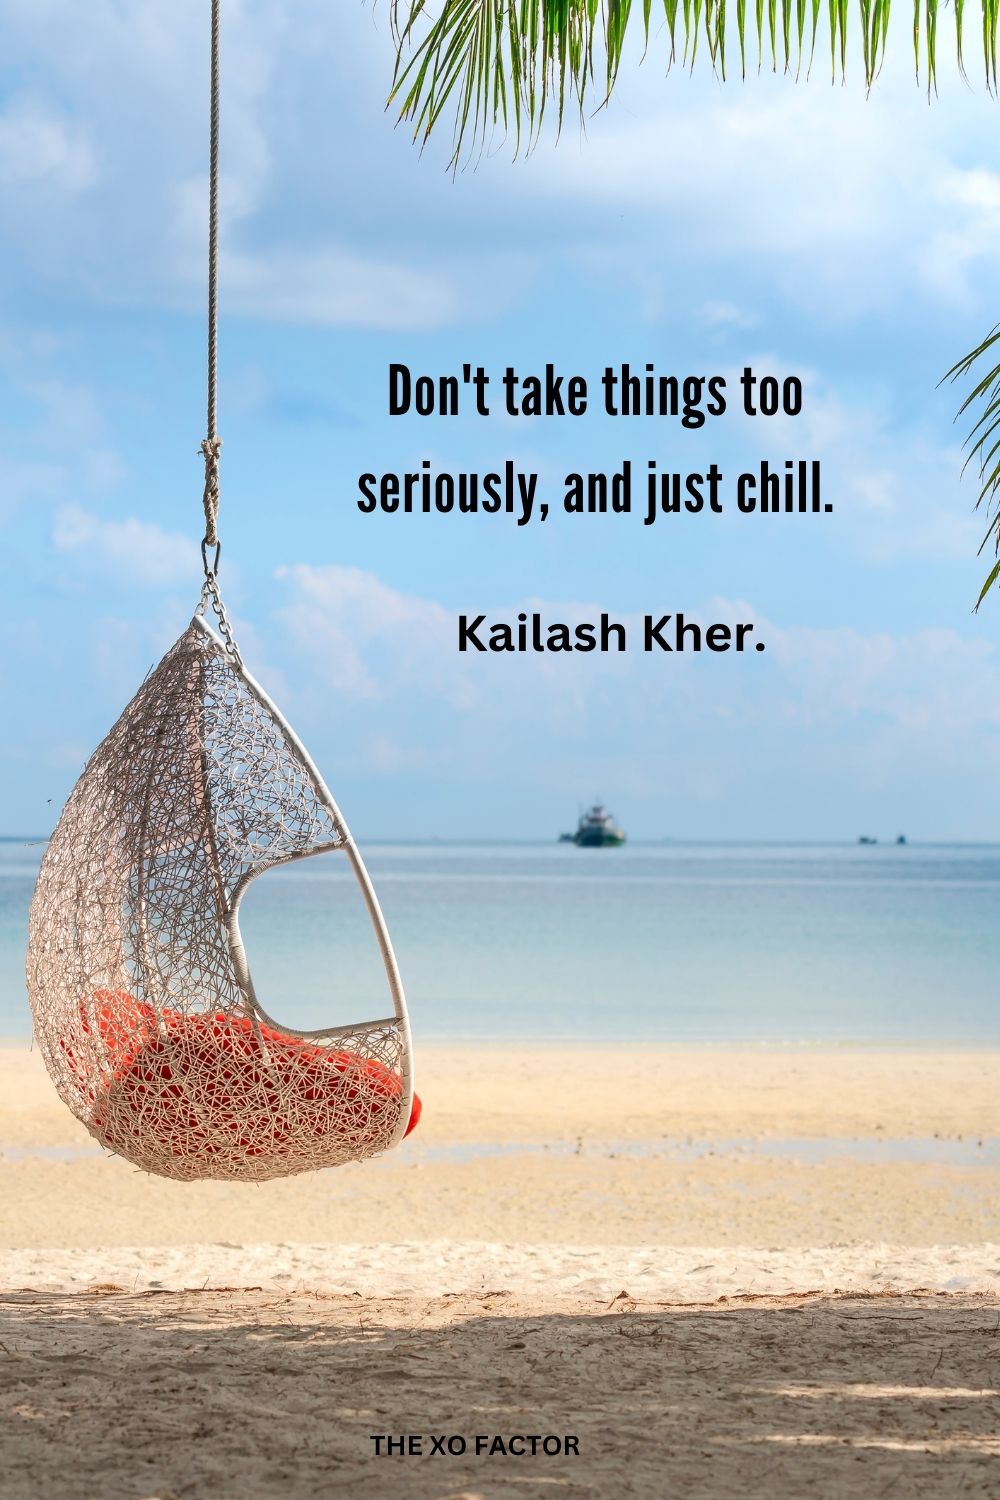 Don't take things too seriously, and just chill.
Kailash Kher.